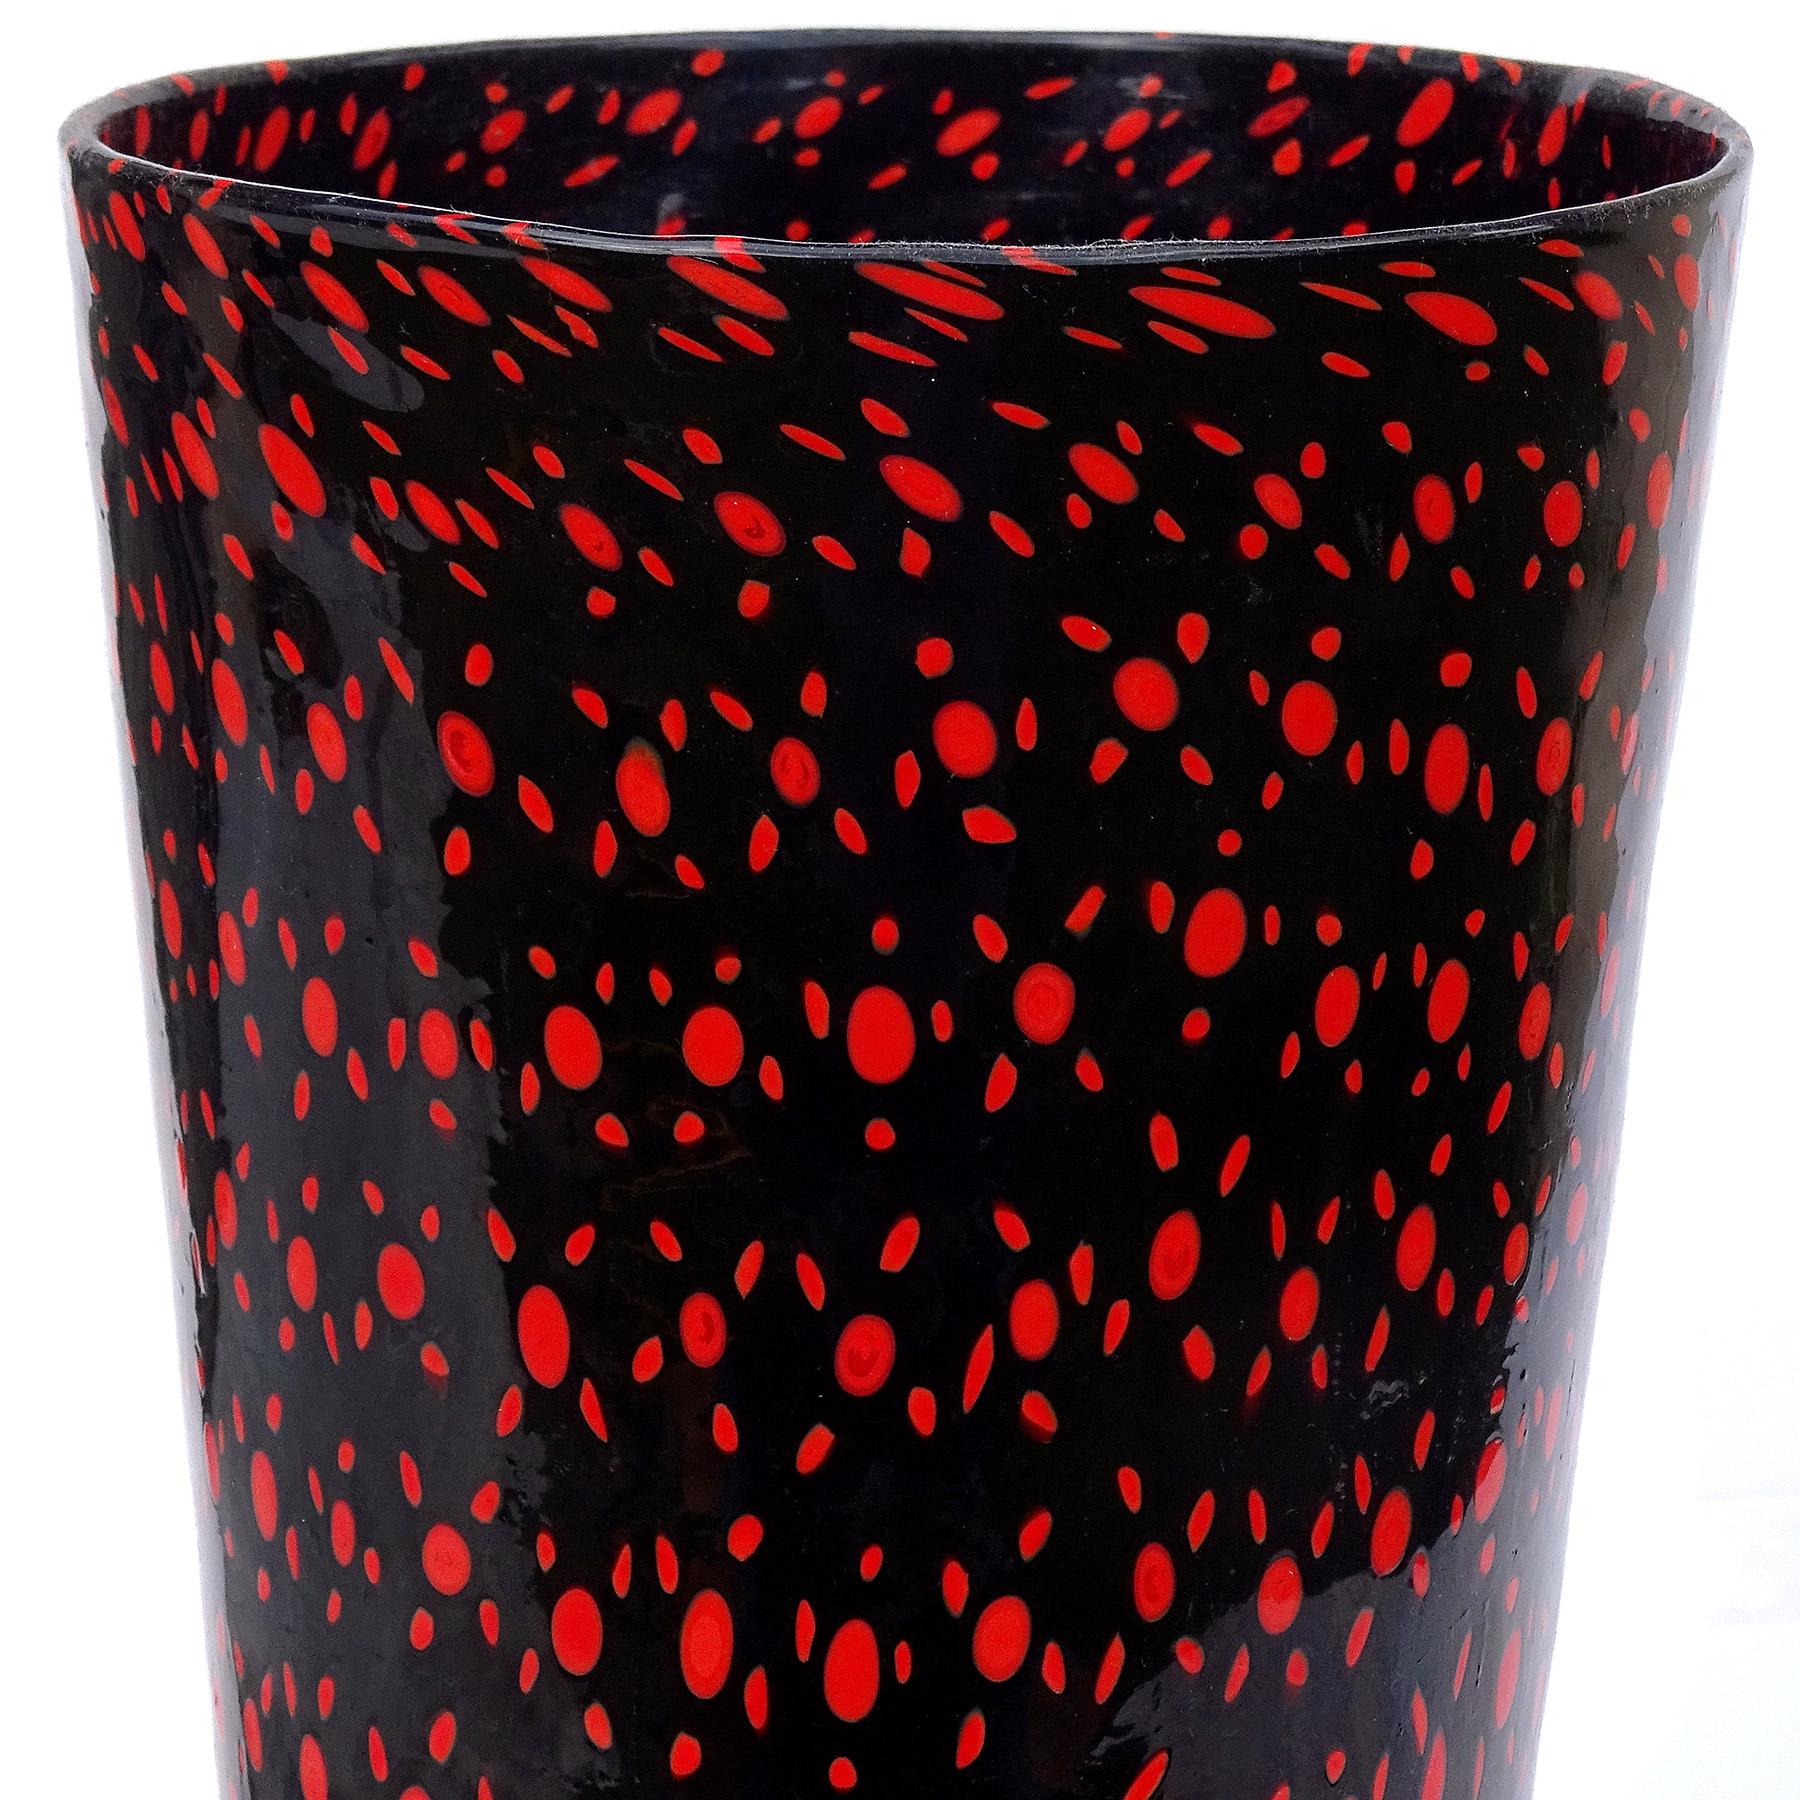 Rare and large Murano hand blown black murrines with bright red orange design Italian art glass flower vase. Attributed to designer Vittorio Ferro, circa 1980-1990s. He became a master and worked for Fratelli Toso from 1952-1981. After leaving FT he